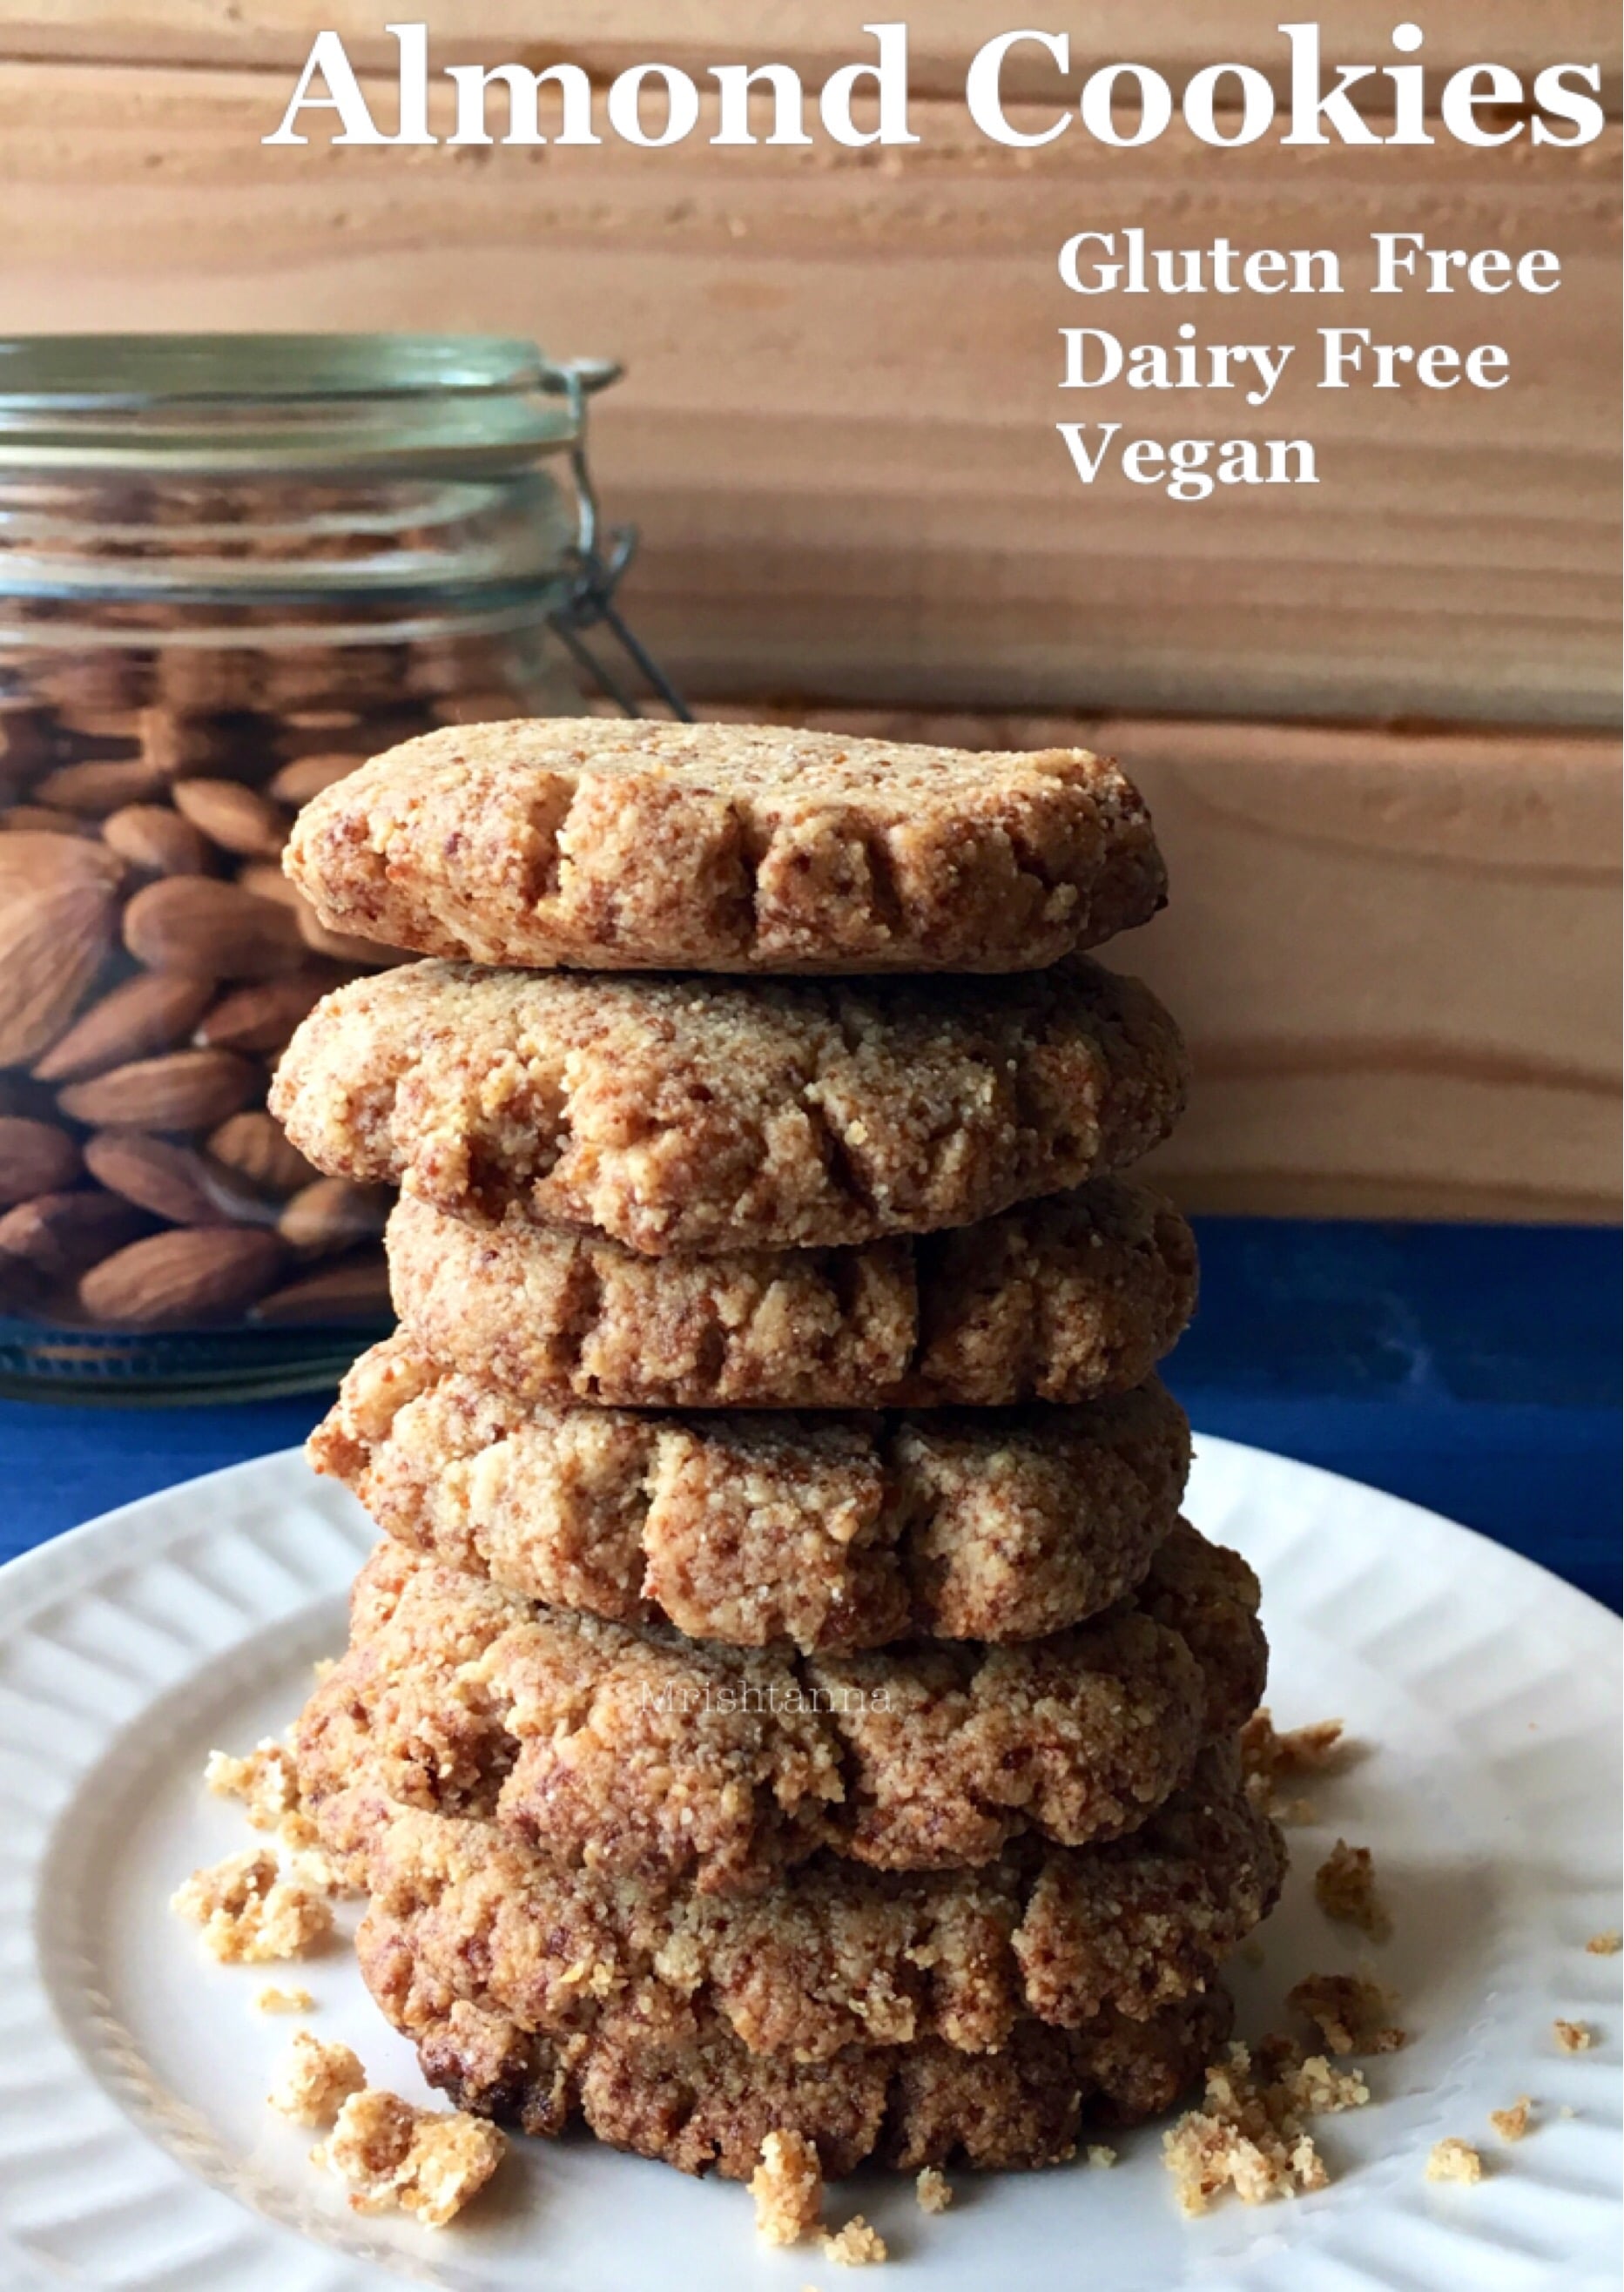 Vegan Almond Cookies are stacked on the plate 